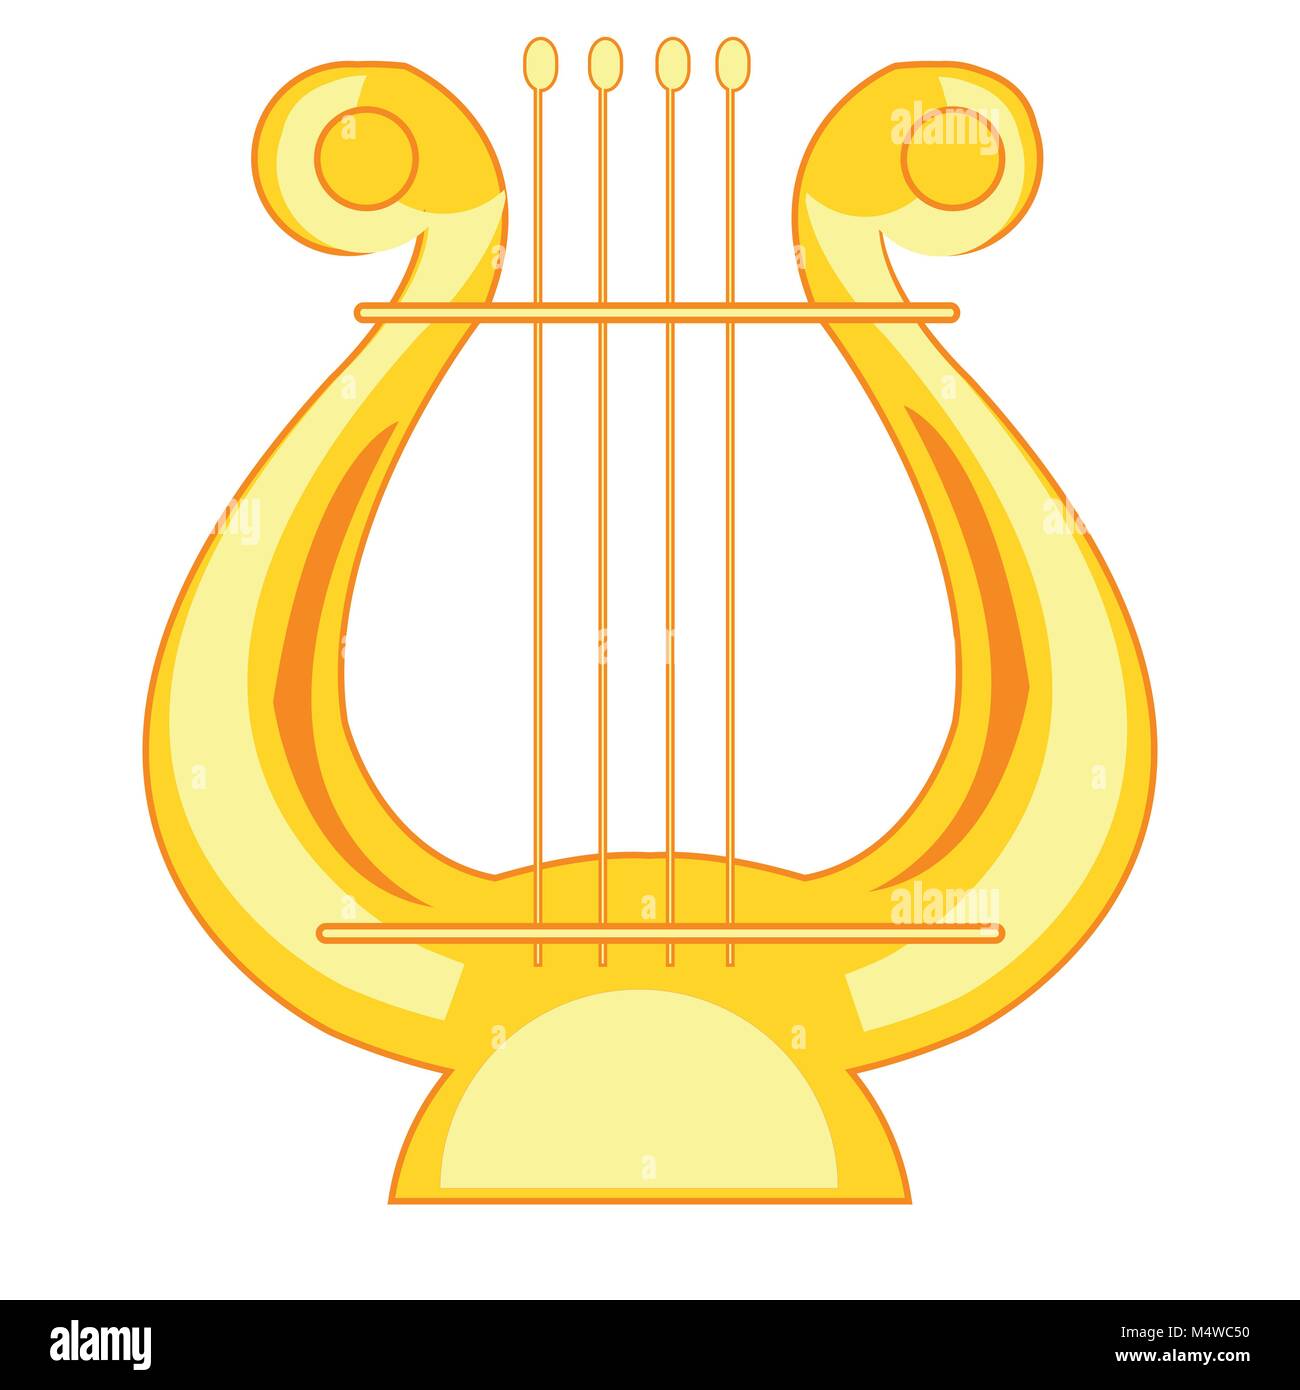 Lira instrument Cut Out Stock Images & Pictures - Alamy